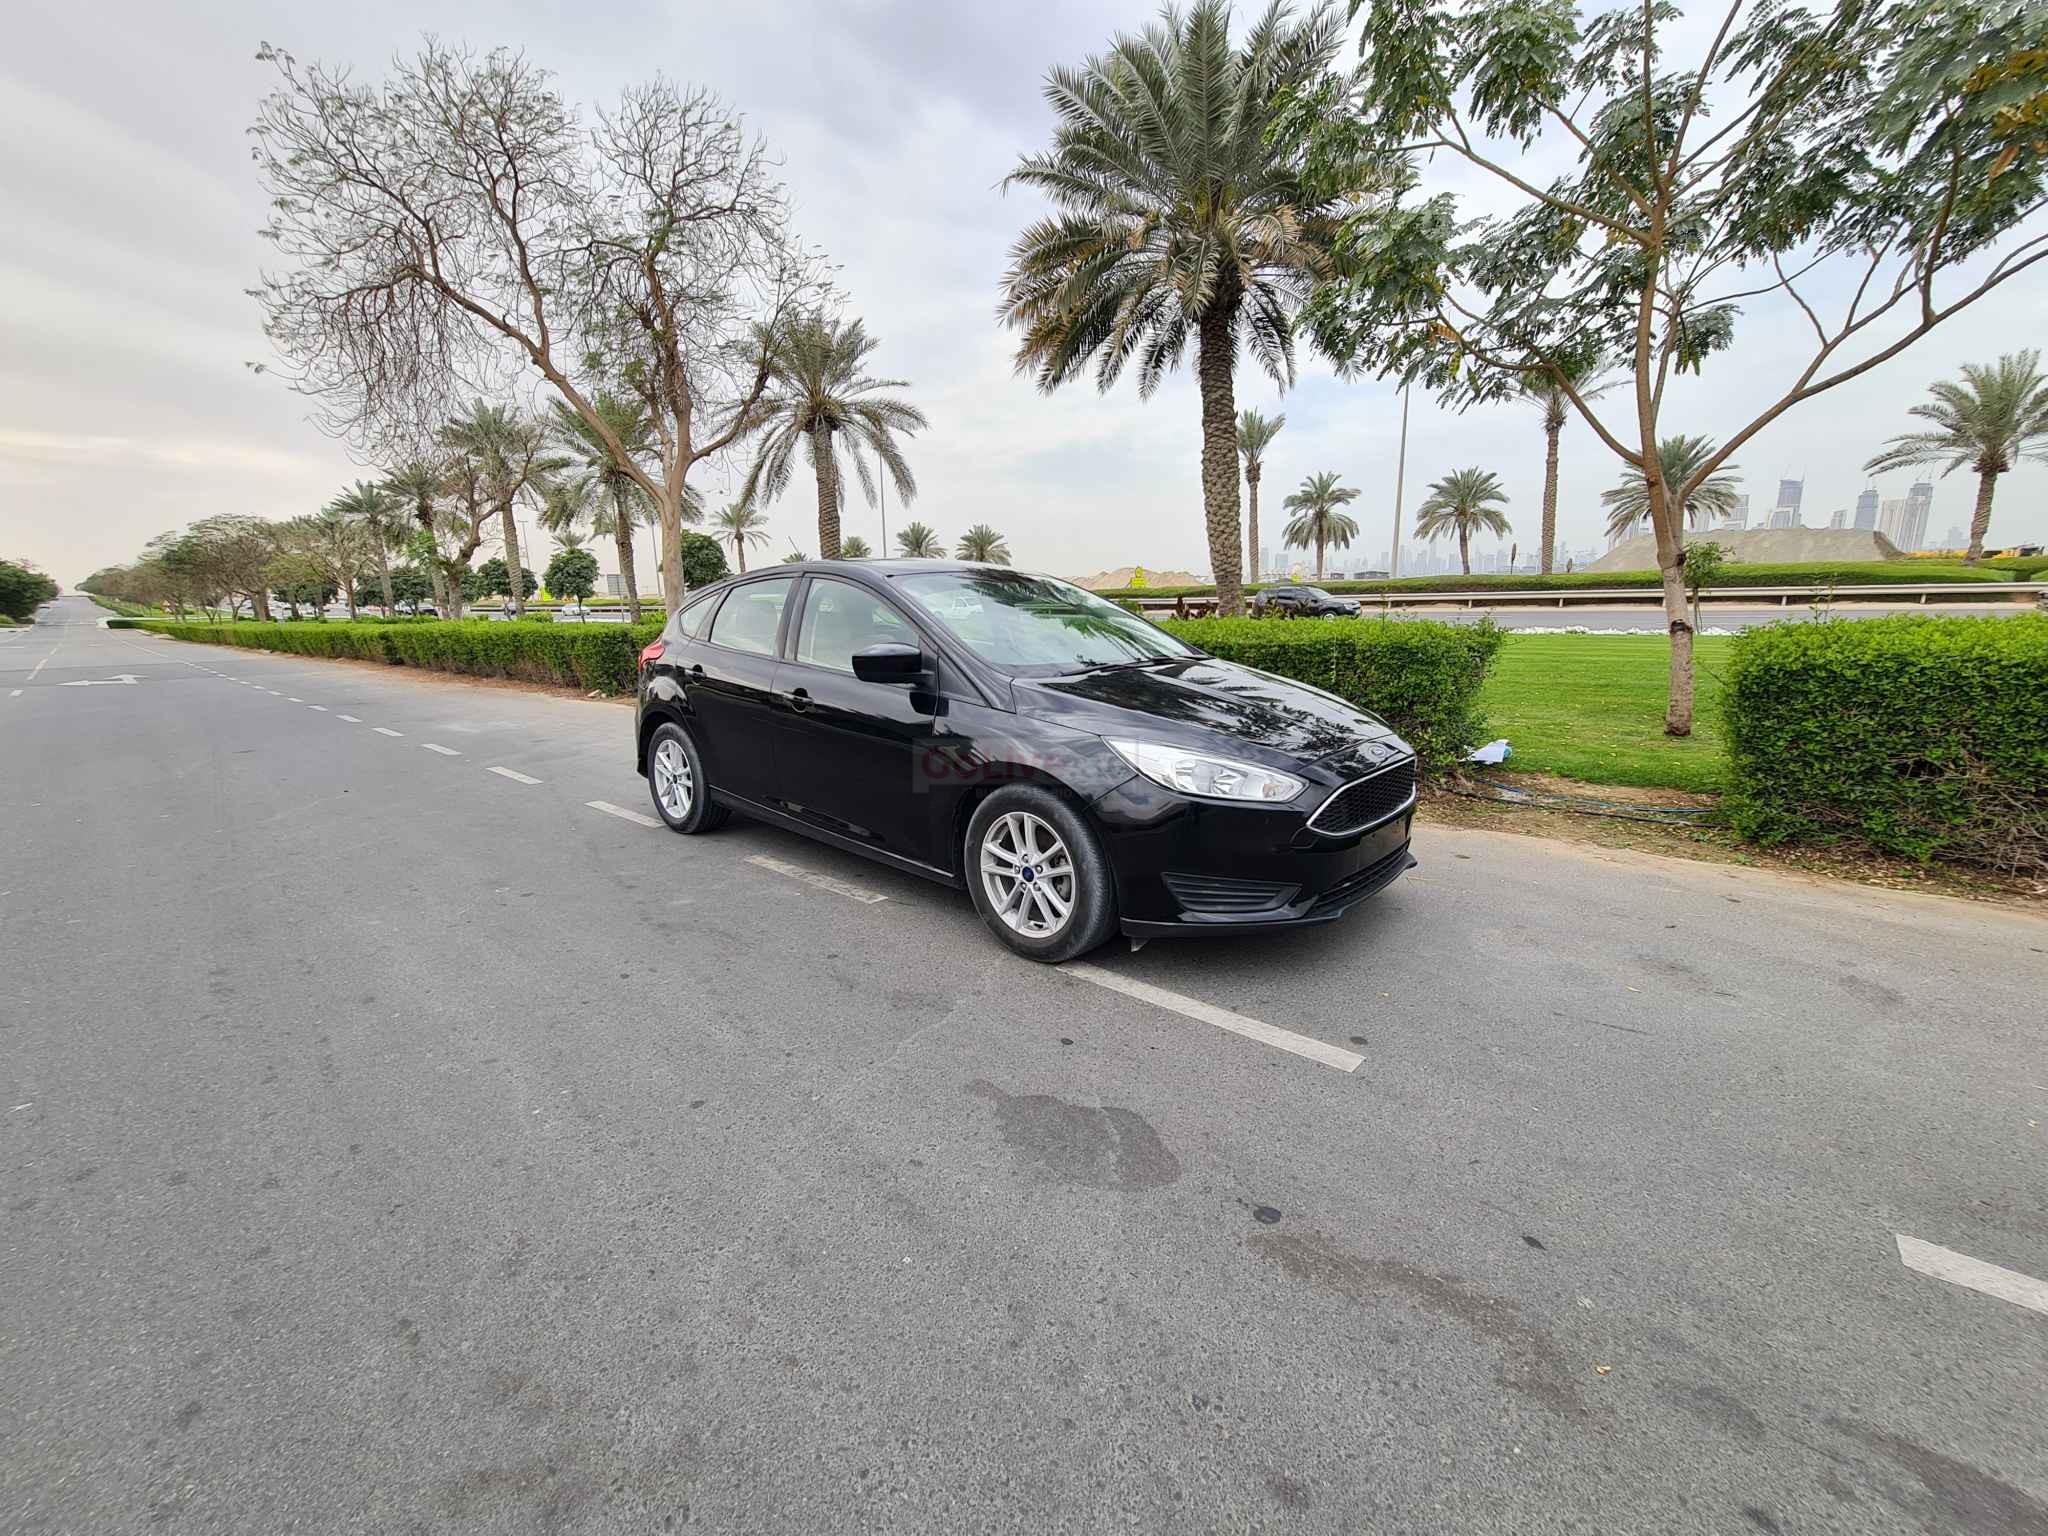 FORD FOCUS 2018, SE MID OPTION, REAR CAMERA, HATCHBACK, BLACK COLOR IN AMAZING CONDITION